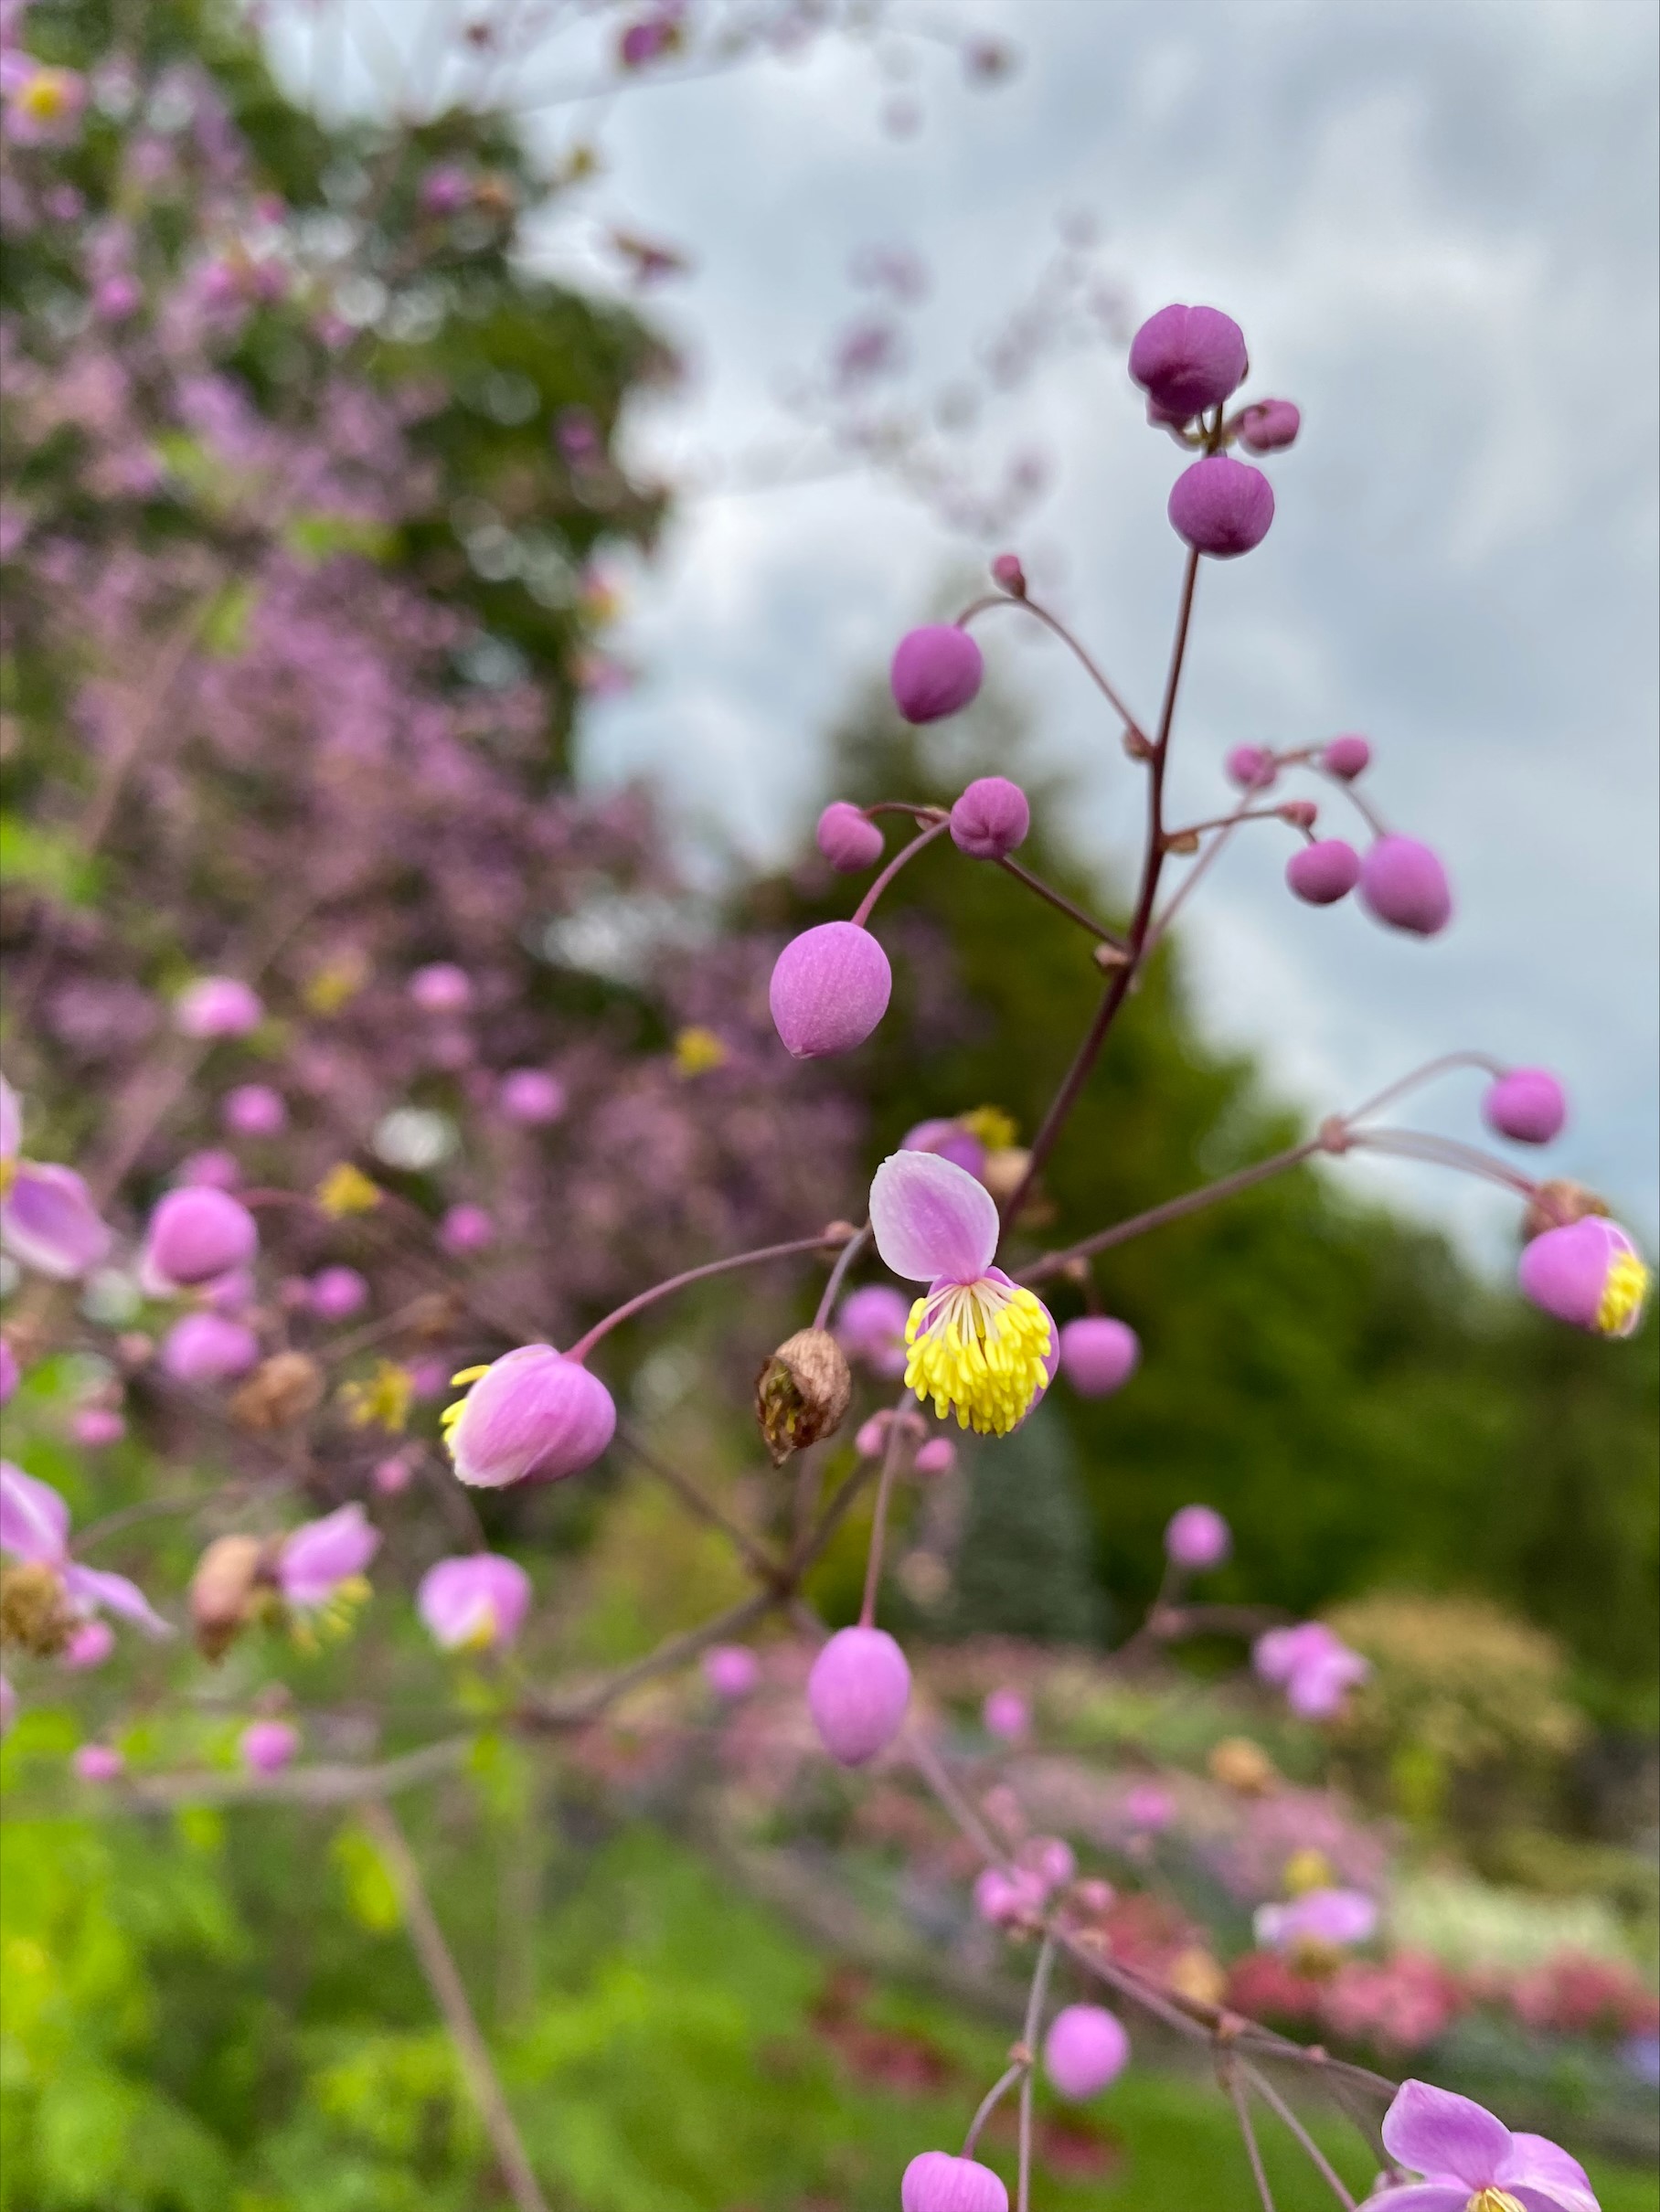 Chinese meadow rue flowers